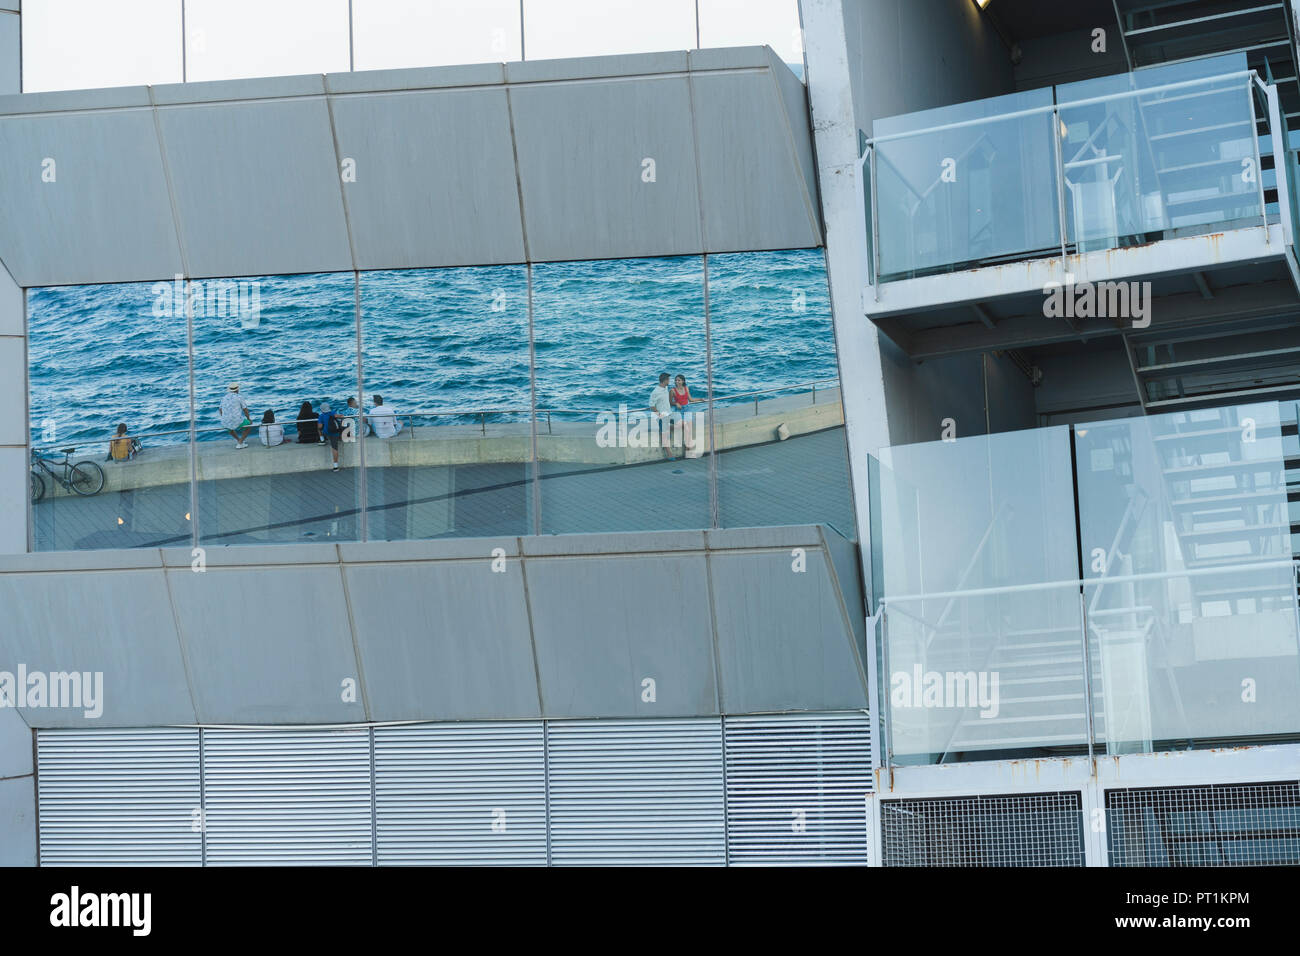 People at the sea, reflection in window of a building Stock Photo